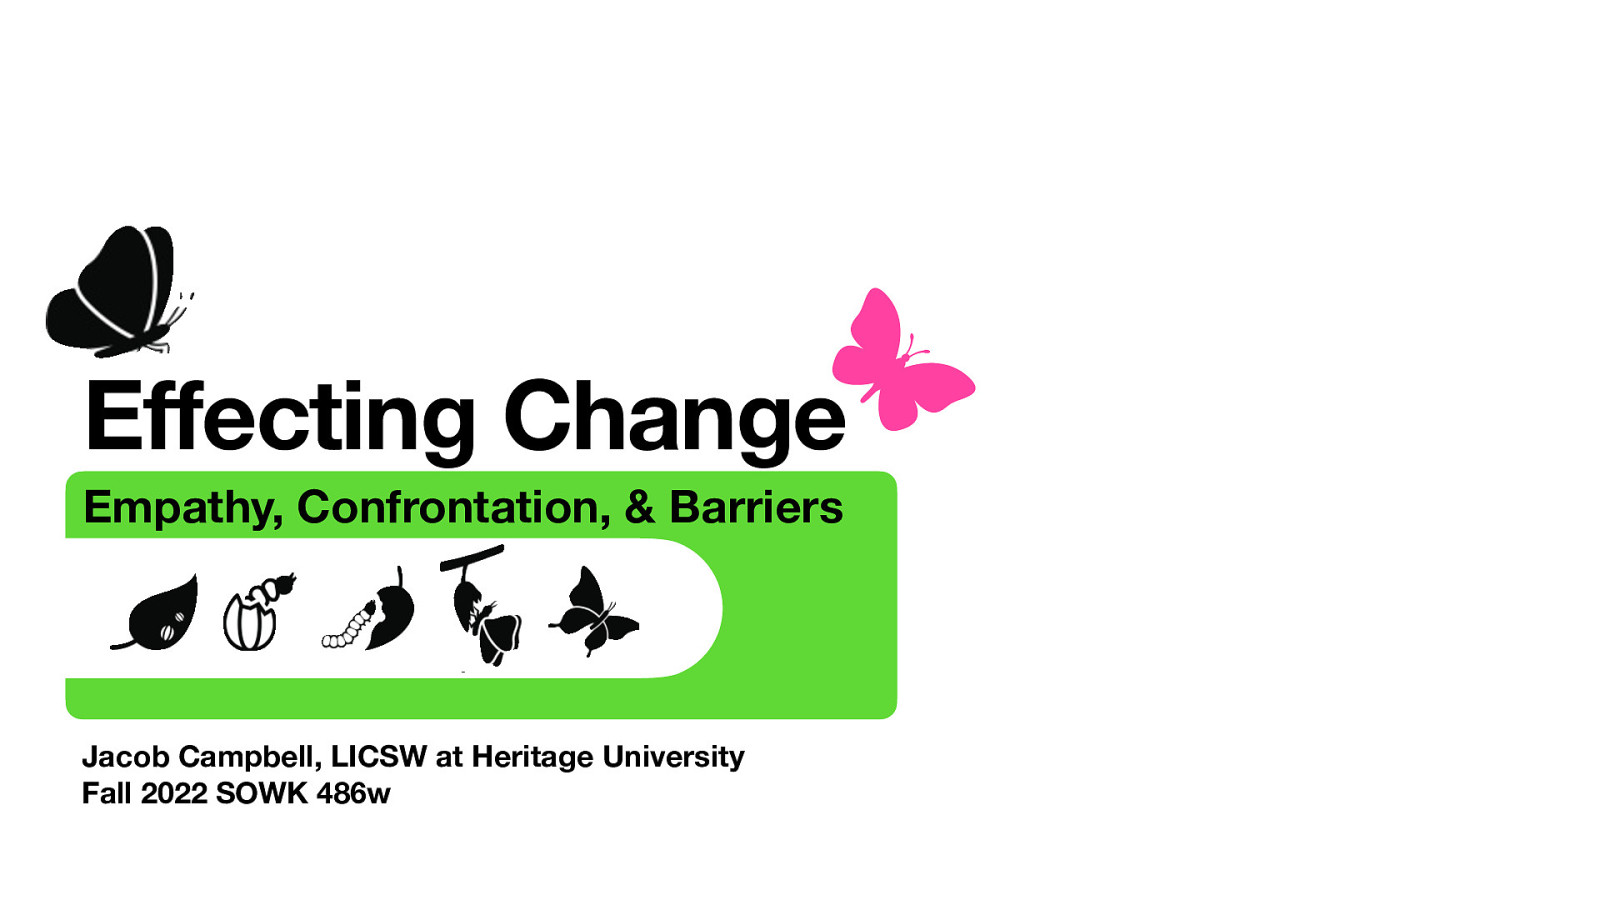 Fall 2022 SOWK 486w Week 13 - Effecting Change - Empathy, Confrontation, & Barriers New